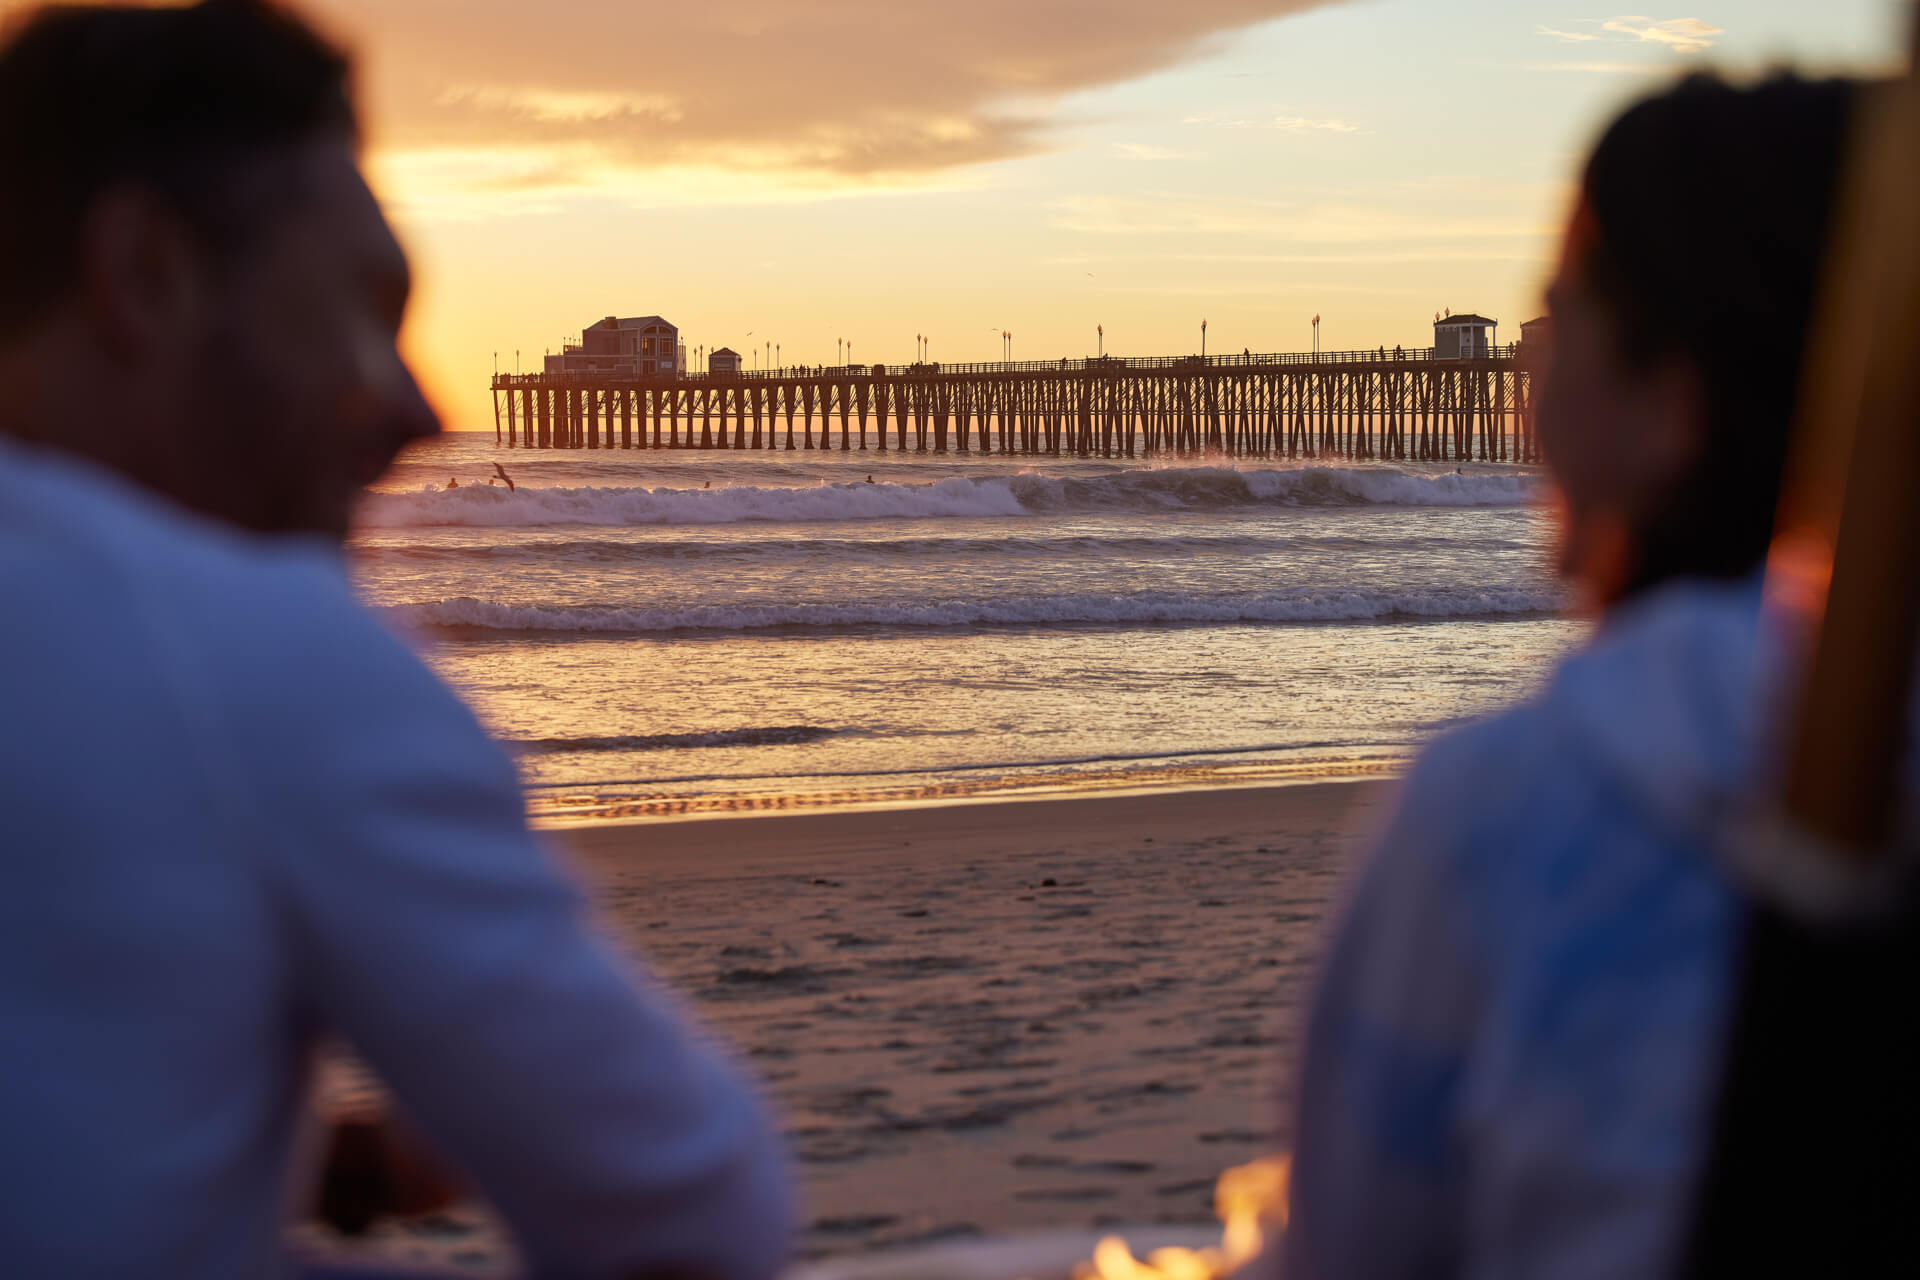 A couple admiring the Pier in Oceanside during the sunset